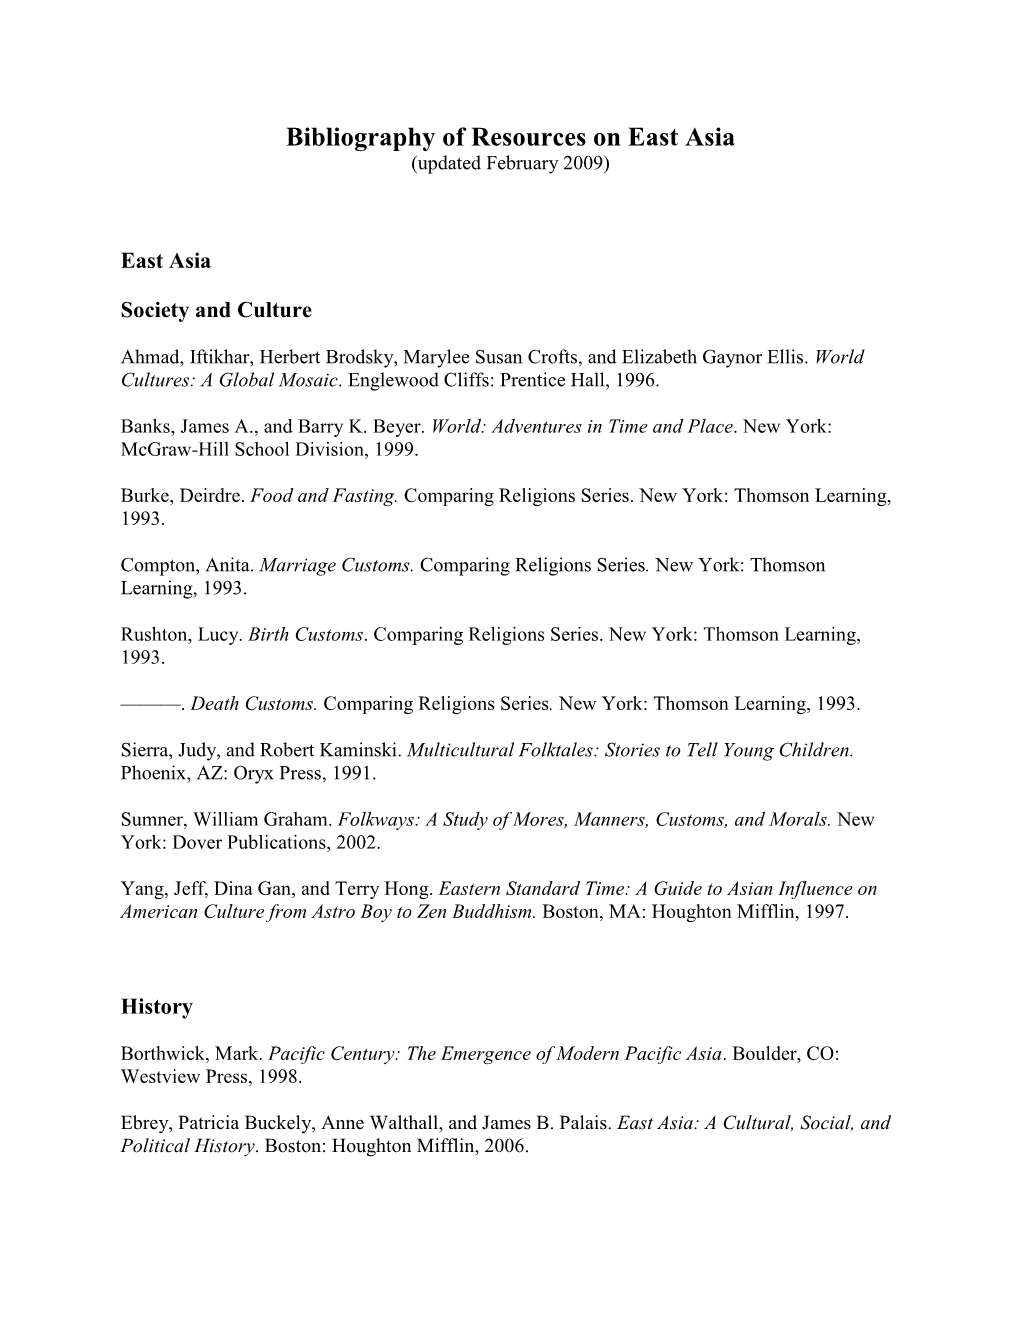 Bibliography of Resources on East Asia (Updated February 2009)